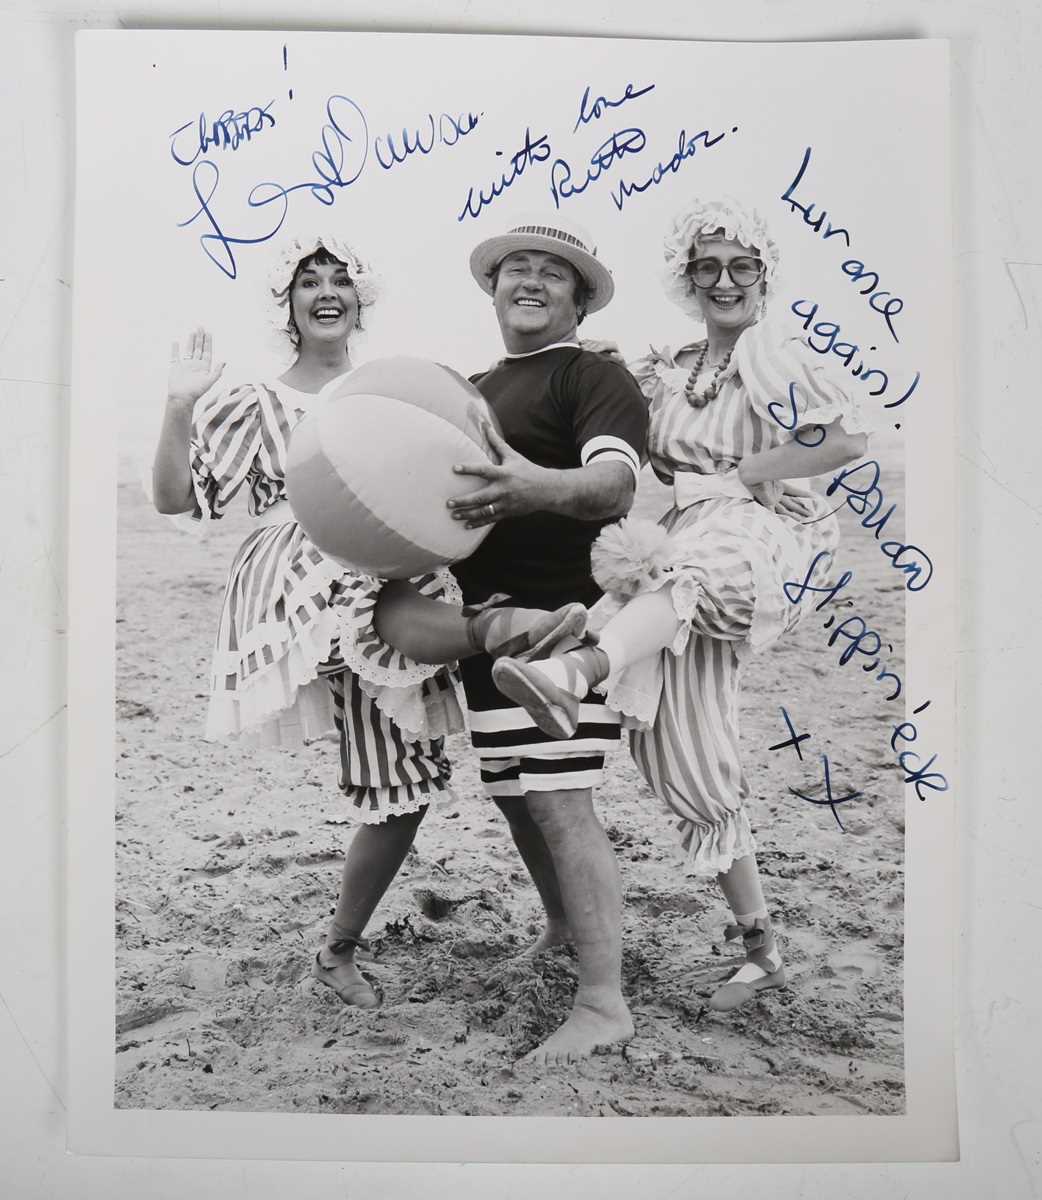 AUTOGRAPH. An autographed black and white oversized photograph signed and inscribed by Les Dawson,